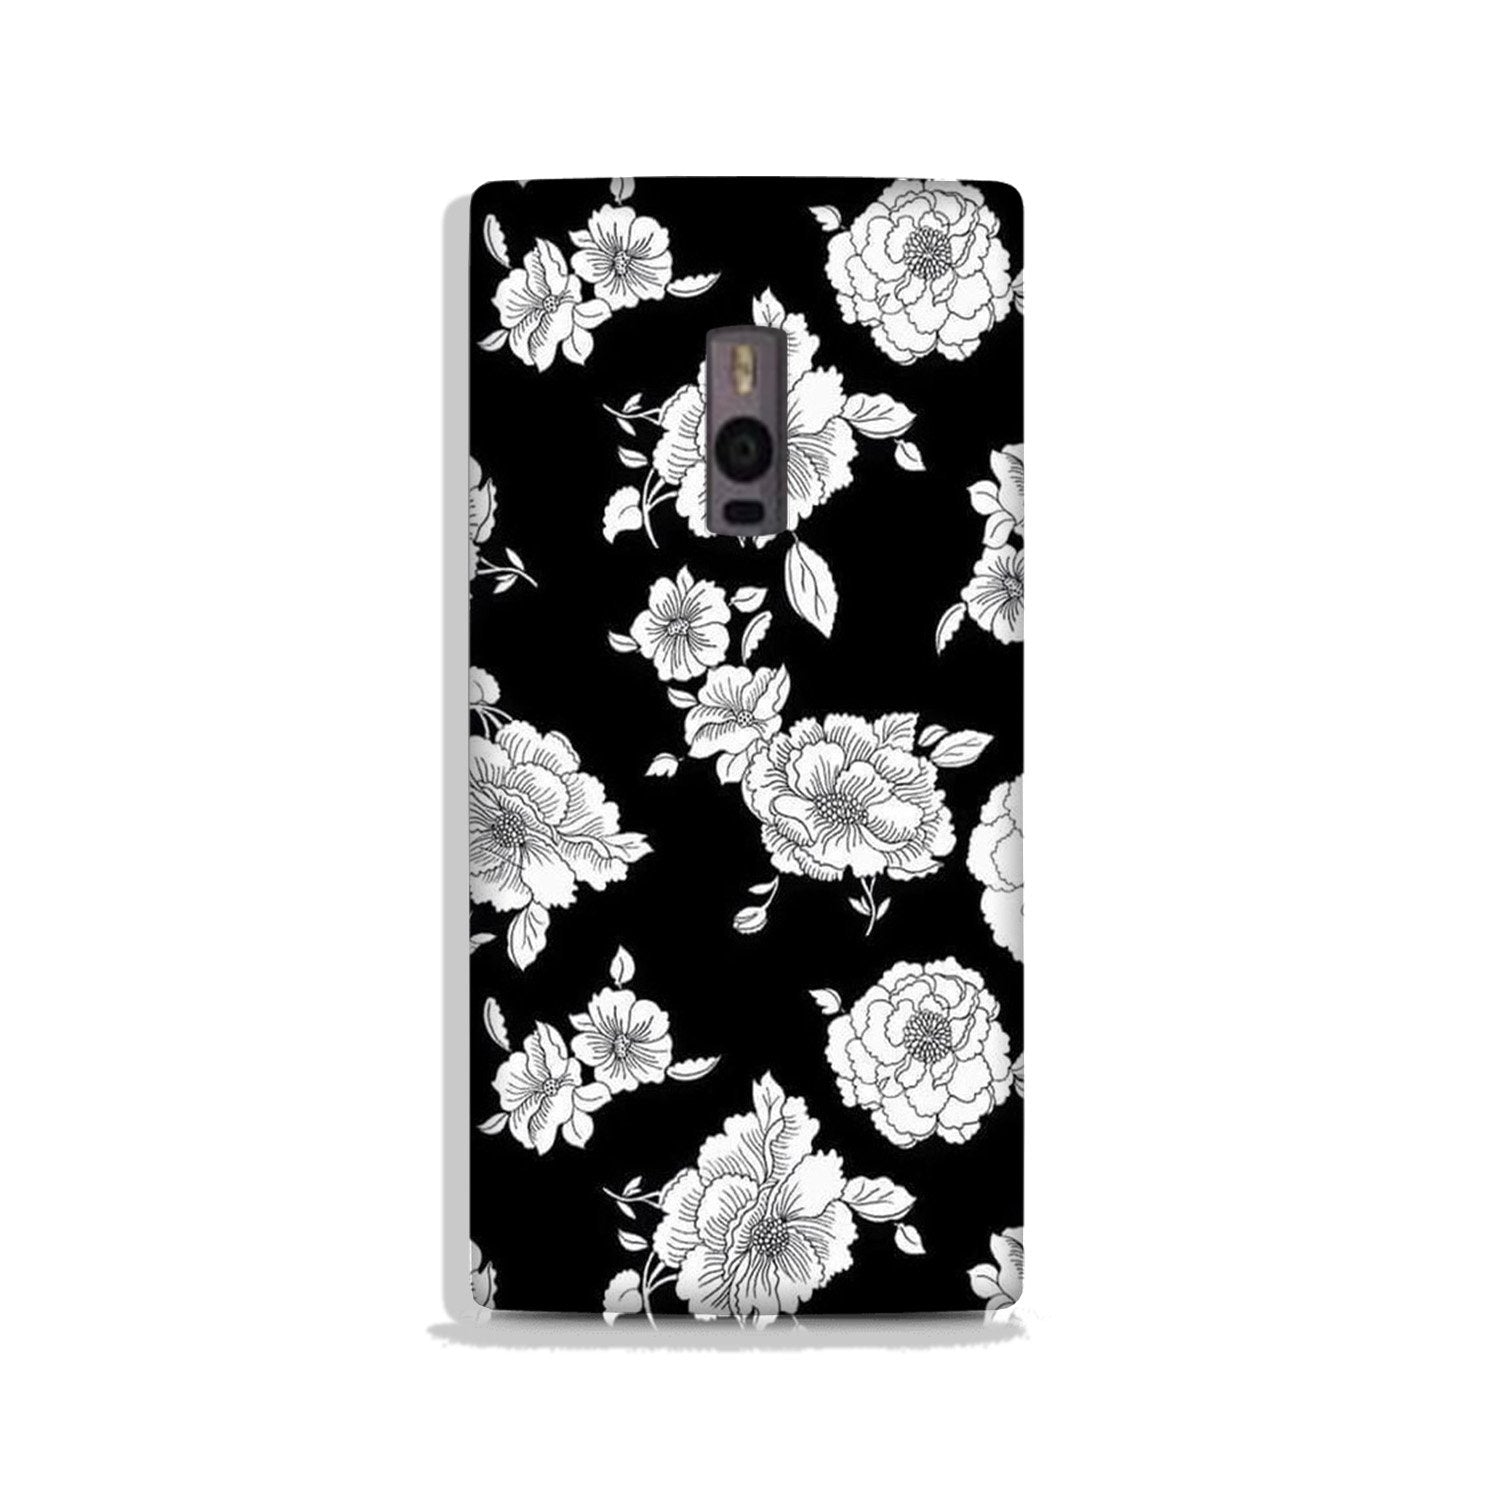 White flowers Black Background Case for OnePlus 2